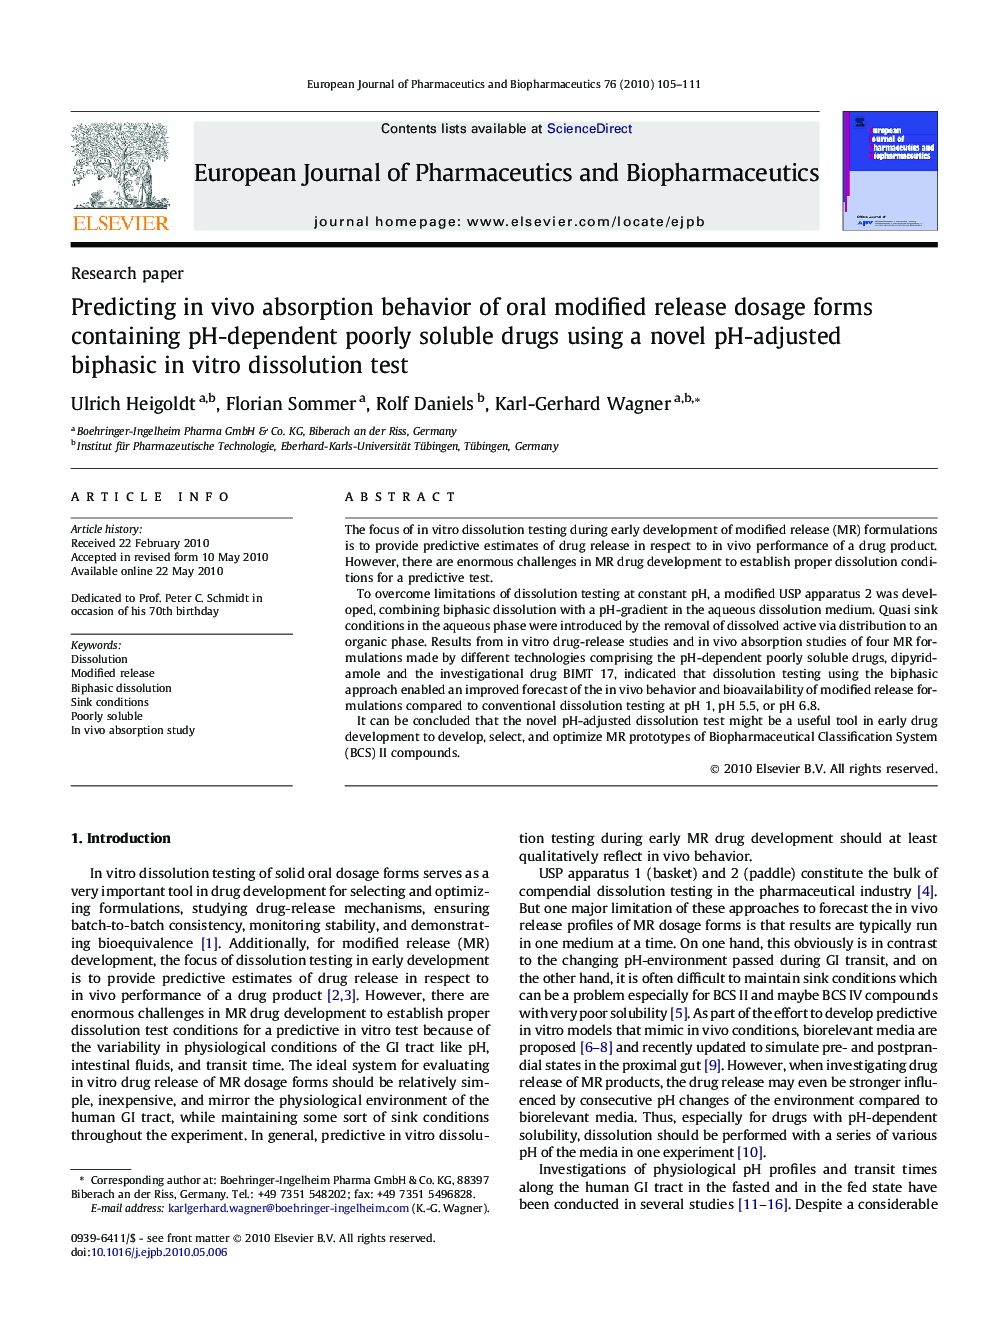 Predicting in vivo absorption behavior of oral modified release dosage forms containing pH-dependent poorly soluble drugs using a novel pH-adjusted biphasic in vitro dissolution test